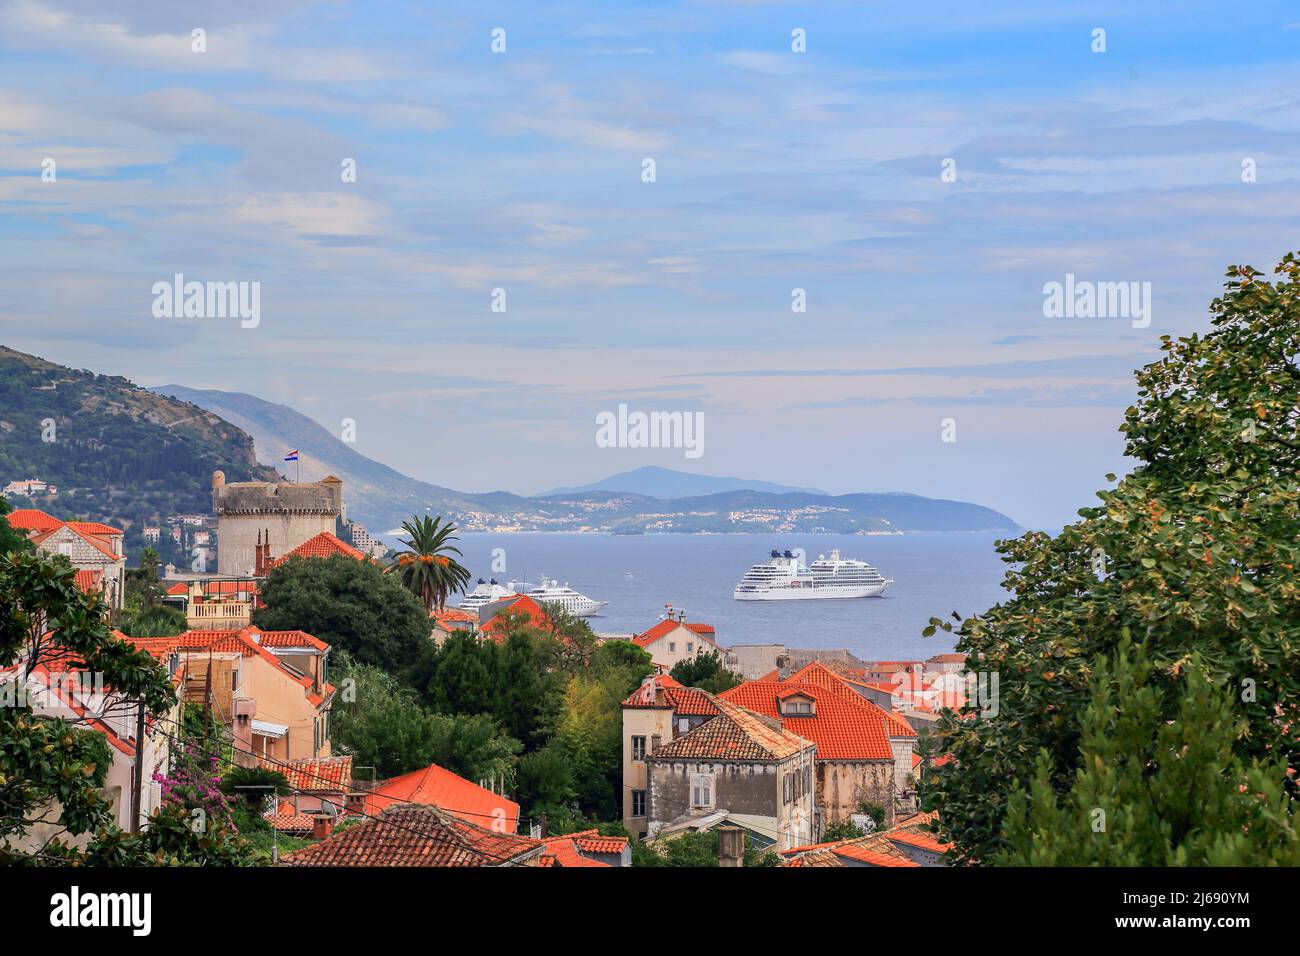 DUBROVNIK, CROATIA - SEPTEMBER 8, 2016: This is a sea liner on the outer roadstead off the coast of the city. Stock Photo